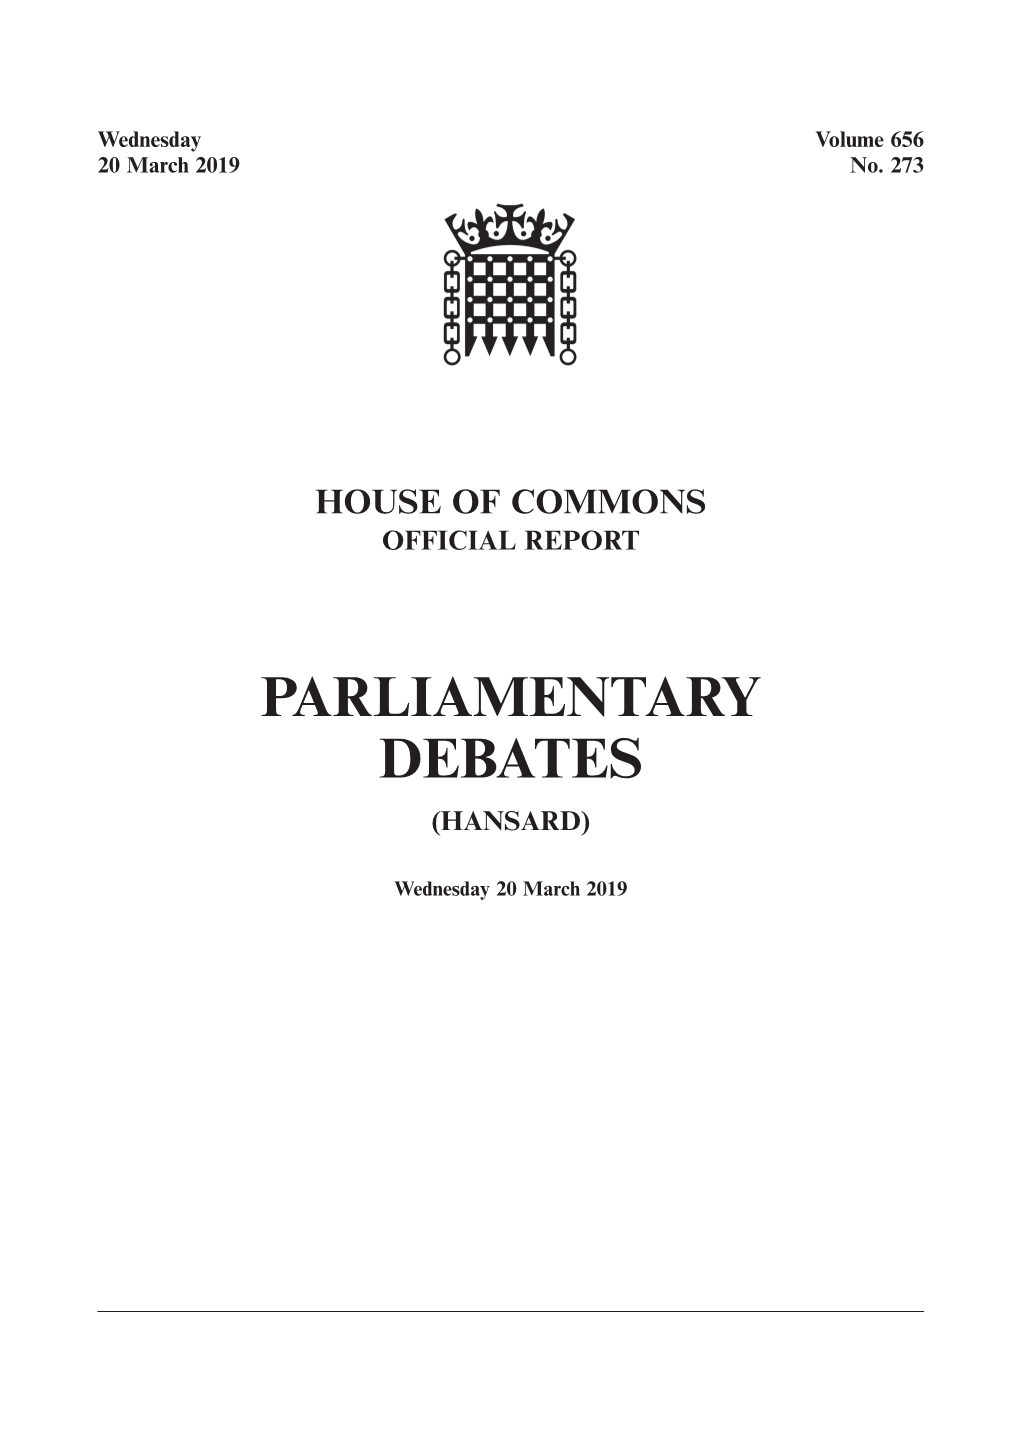 Whole Day Download the Hansard Record of the Entire Day in PDF Format. PDF File, 1.33